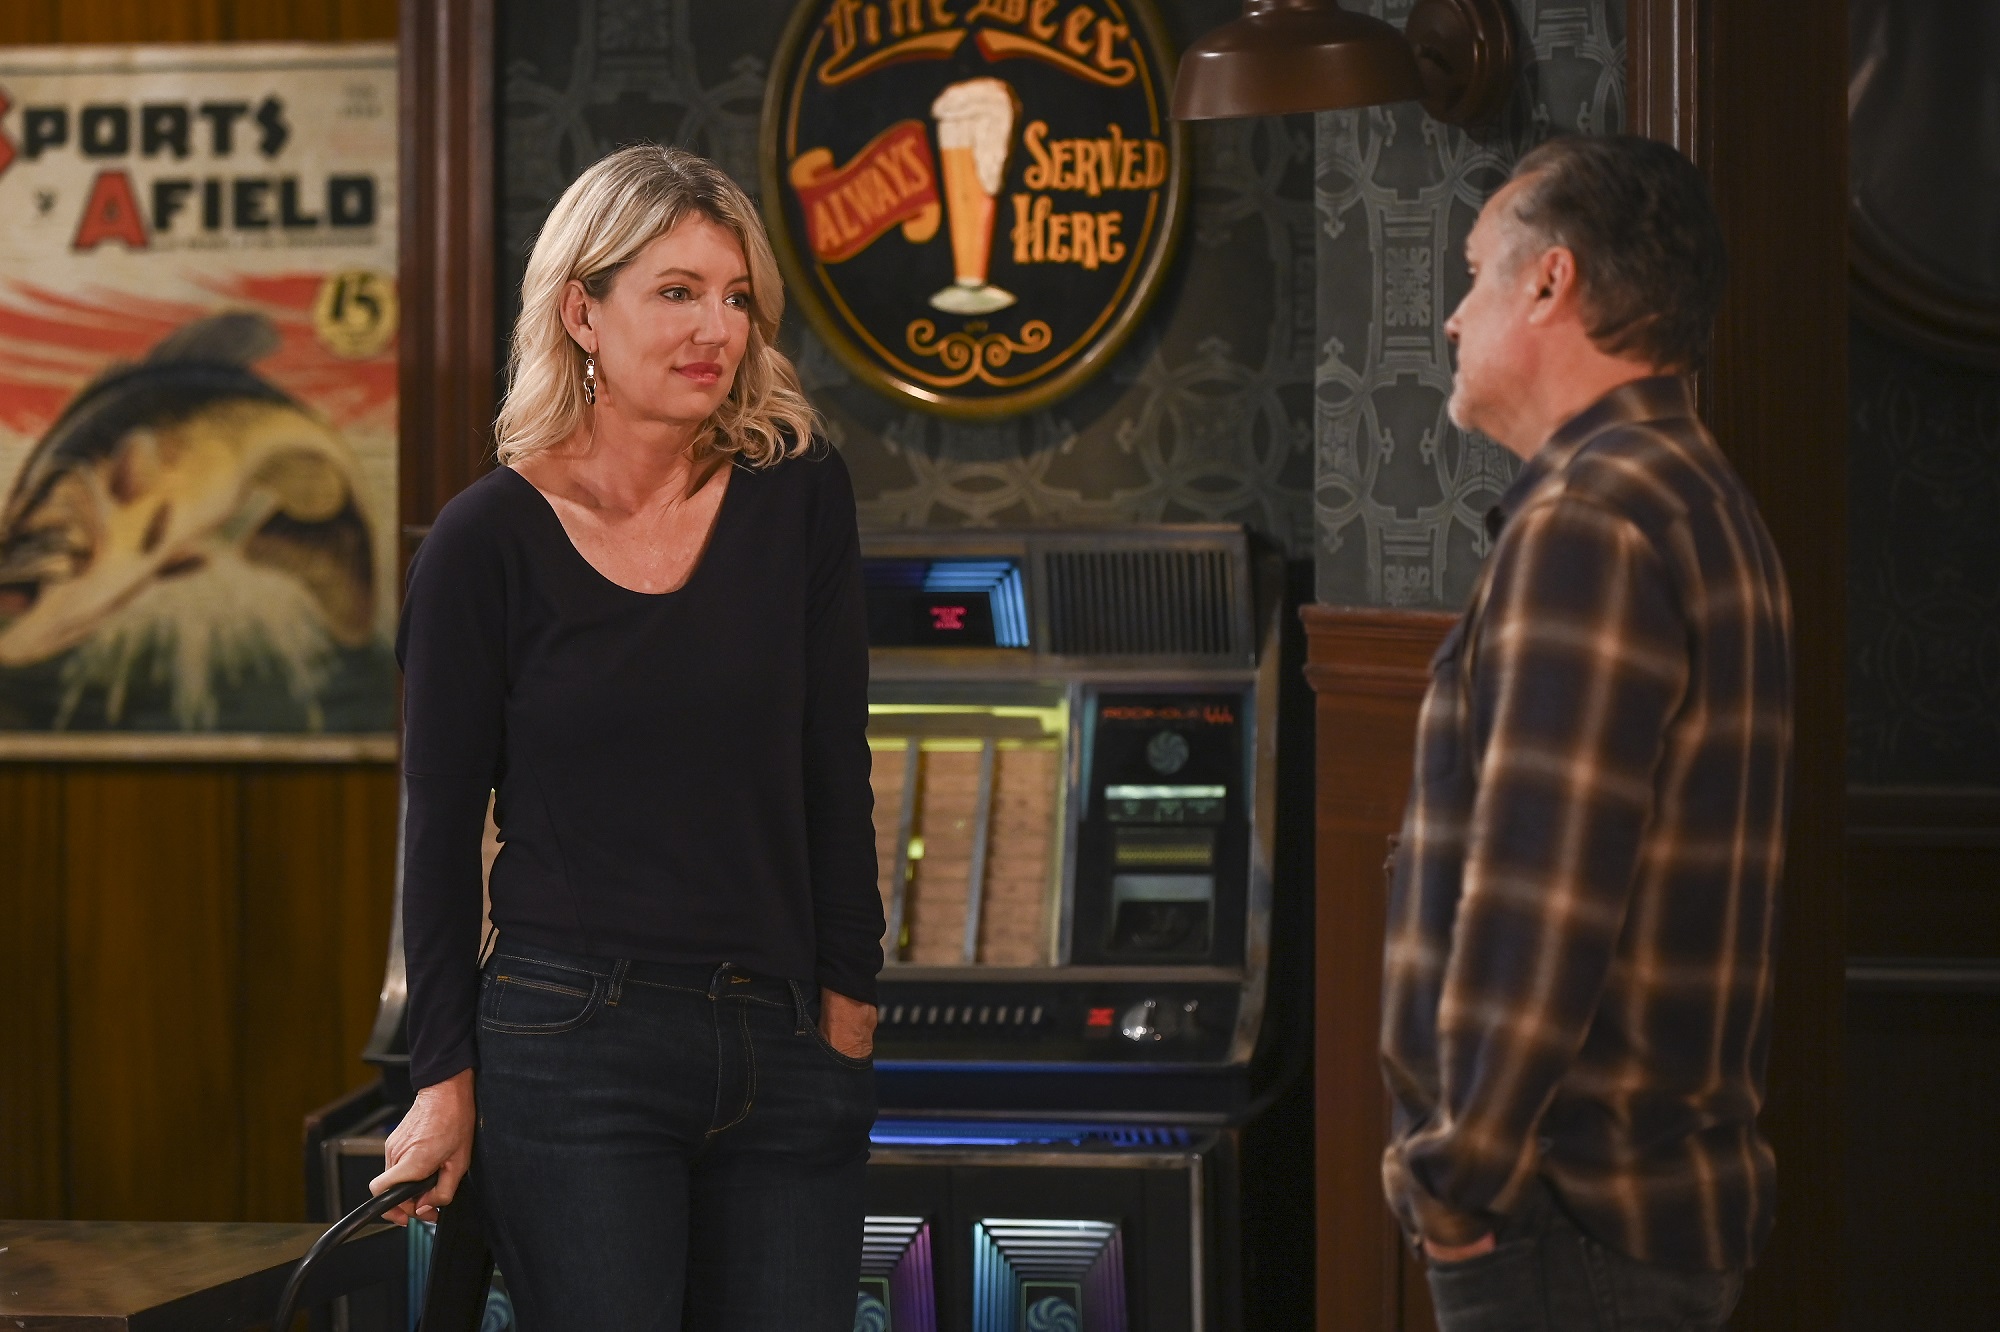 General Hospital speculation focuses on Nina, pictured here in a black shirt with a pair of blue jeans, with a jukebox in the back